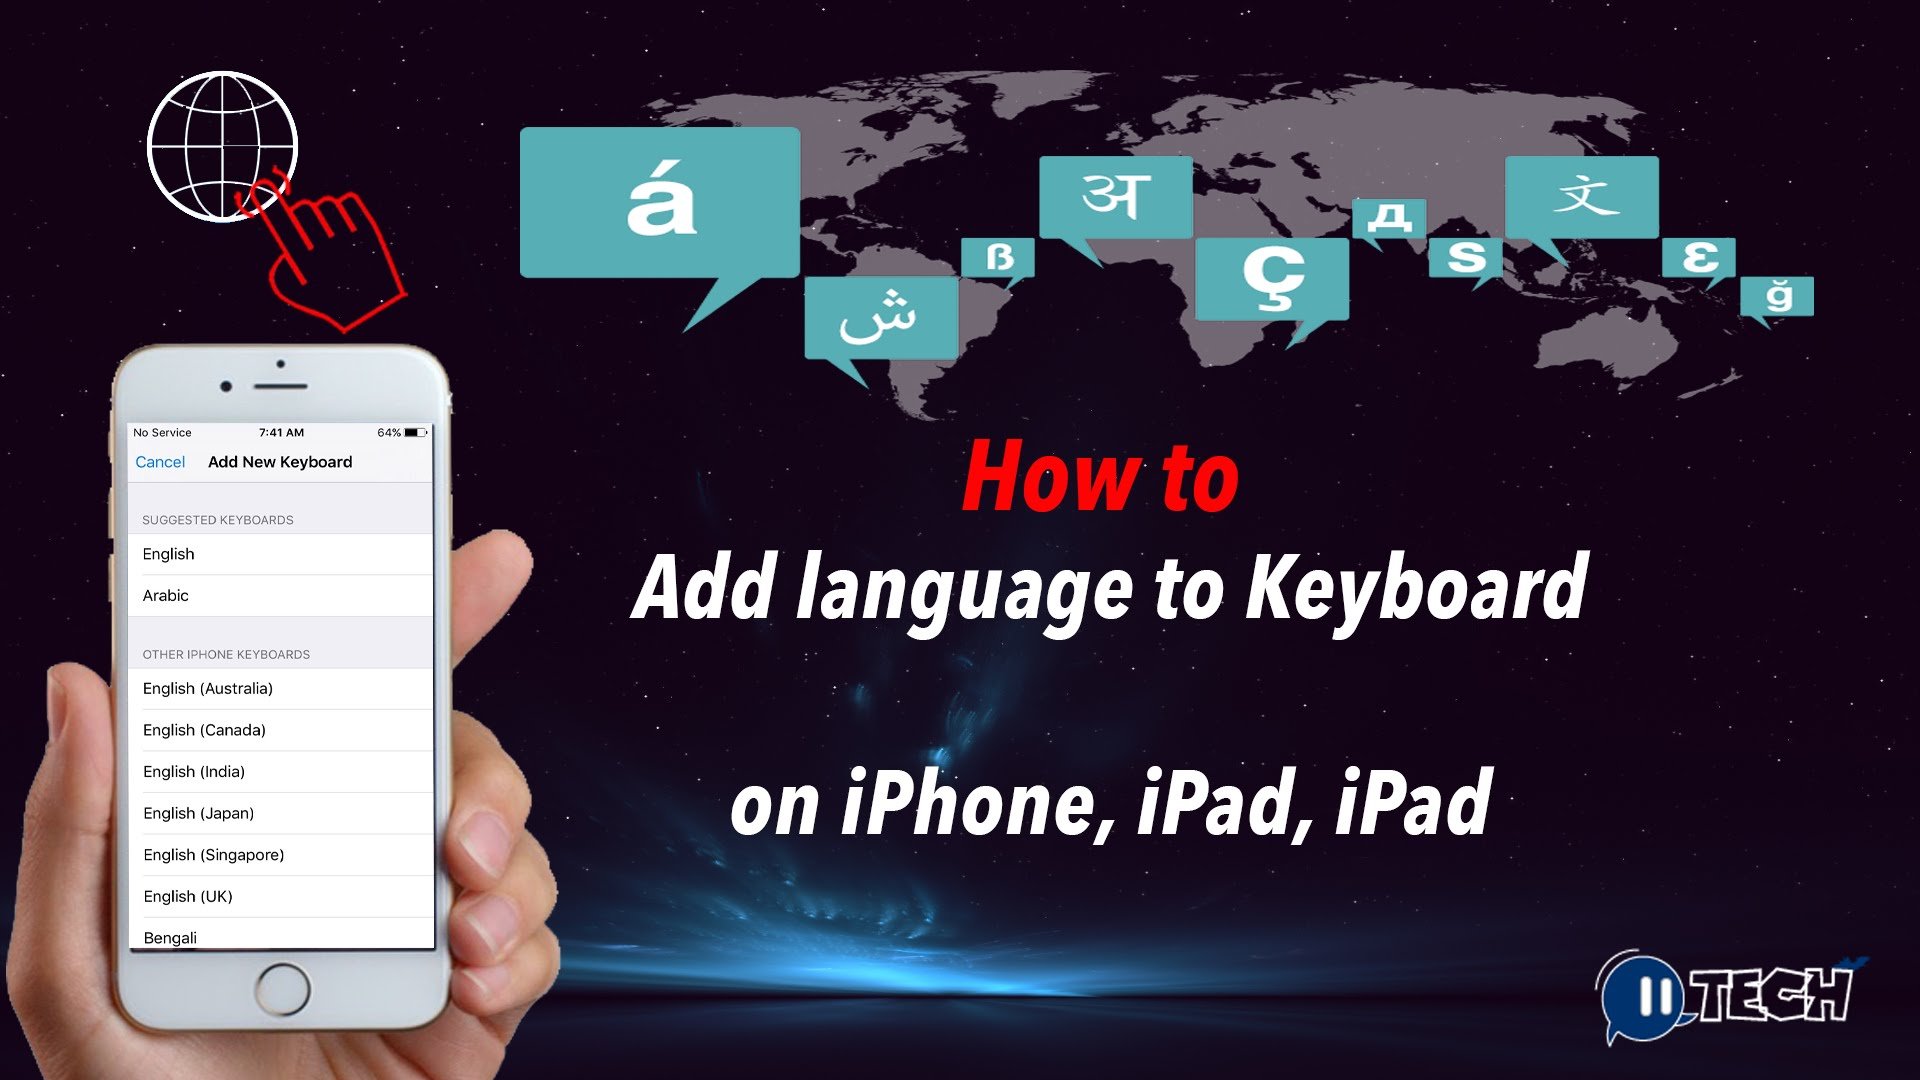 How to Add language to Keyboard on iPhone